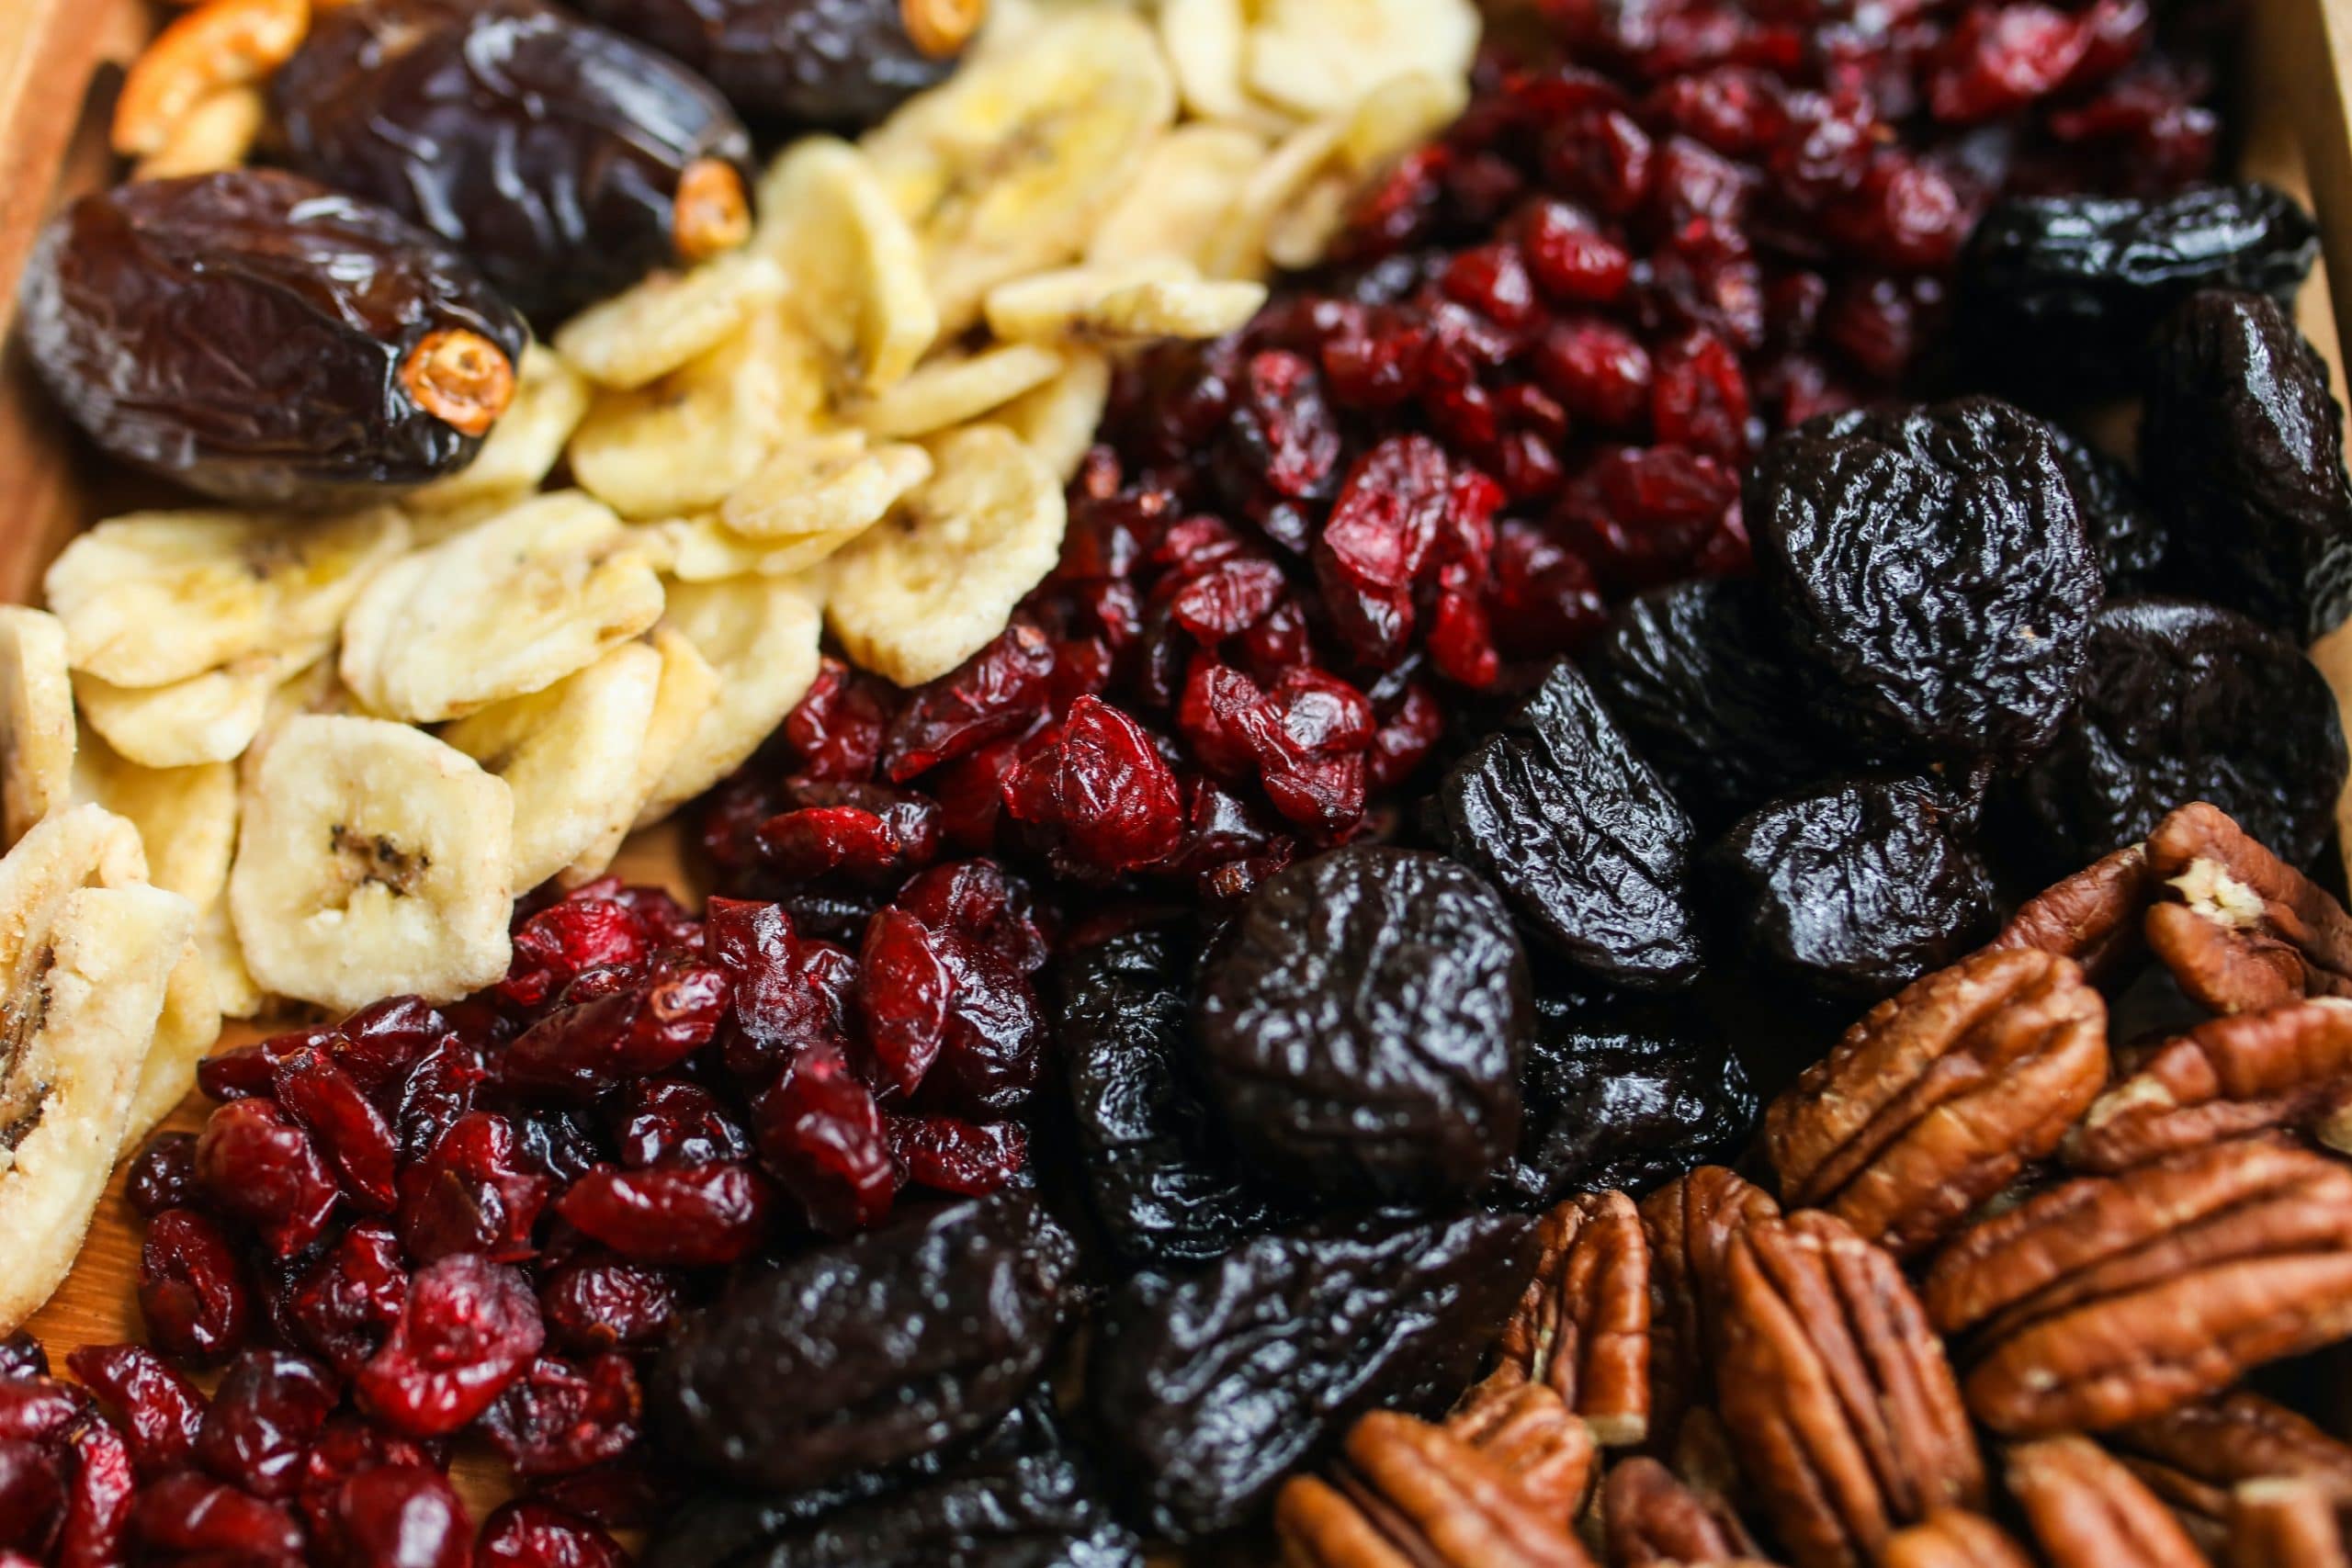 photo of dried fruits to stock in a vegan pantry